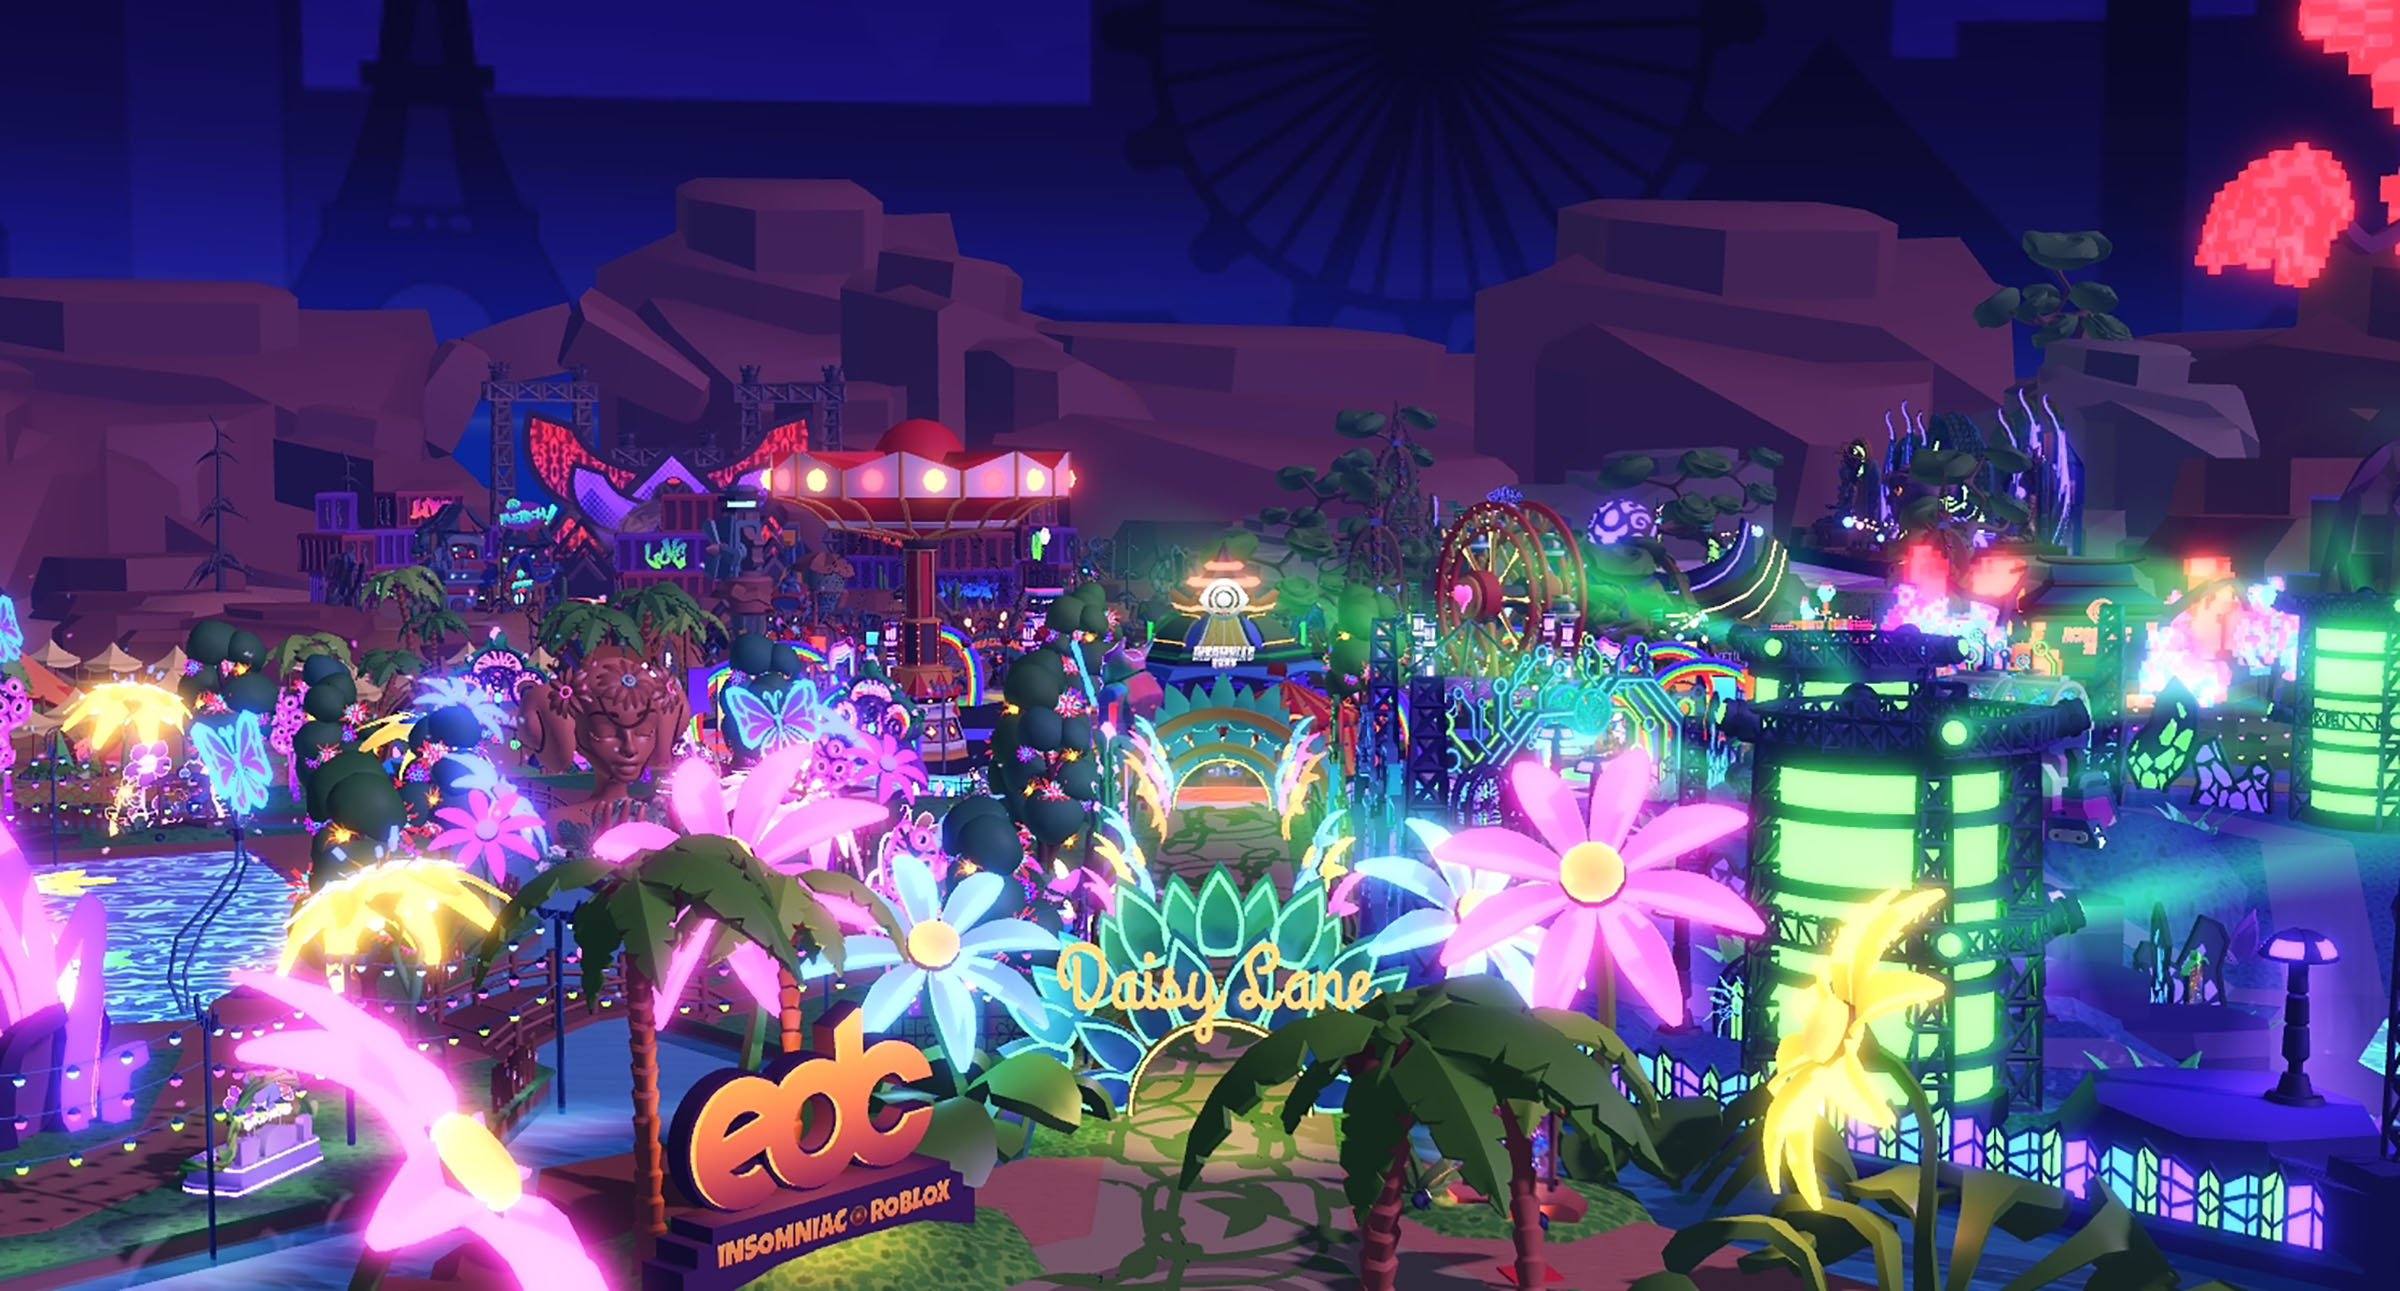 The Electric Daisy Carnival was the first music festival in Roblox held over several days in October 2021. (Businesswire/AP)